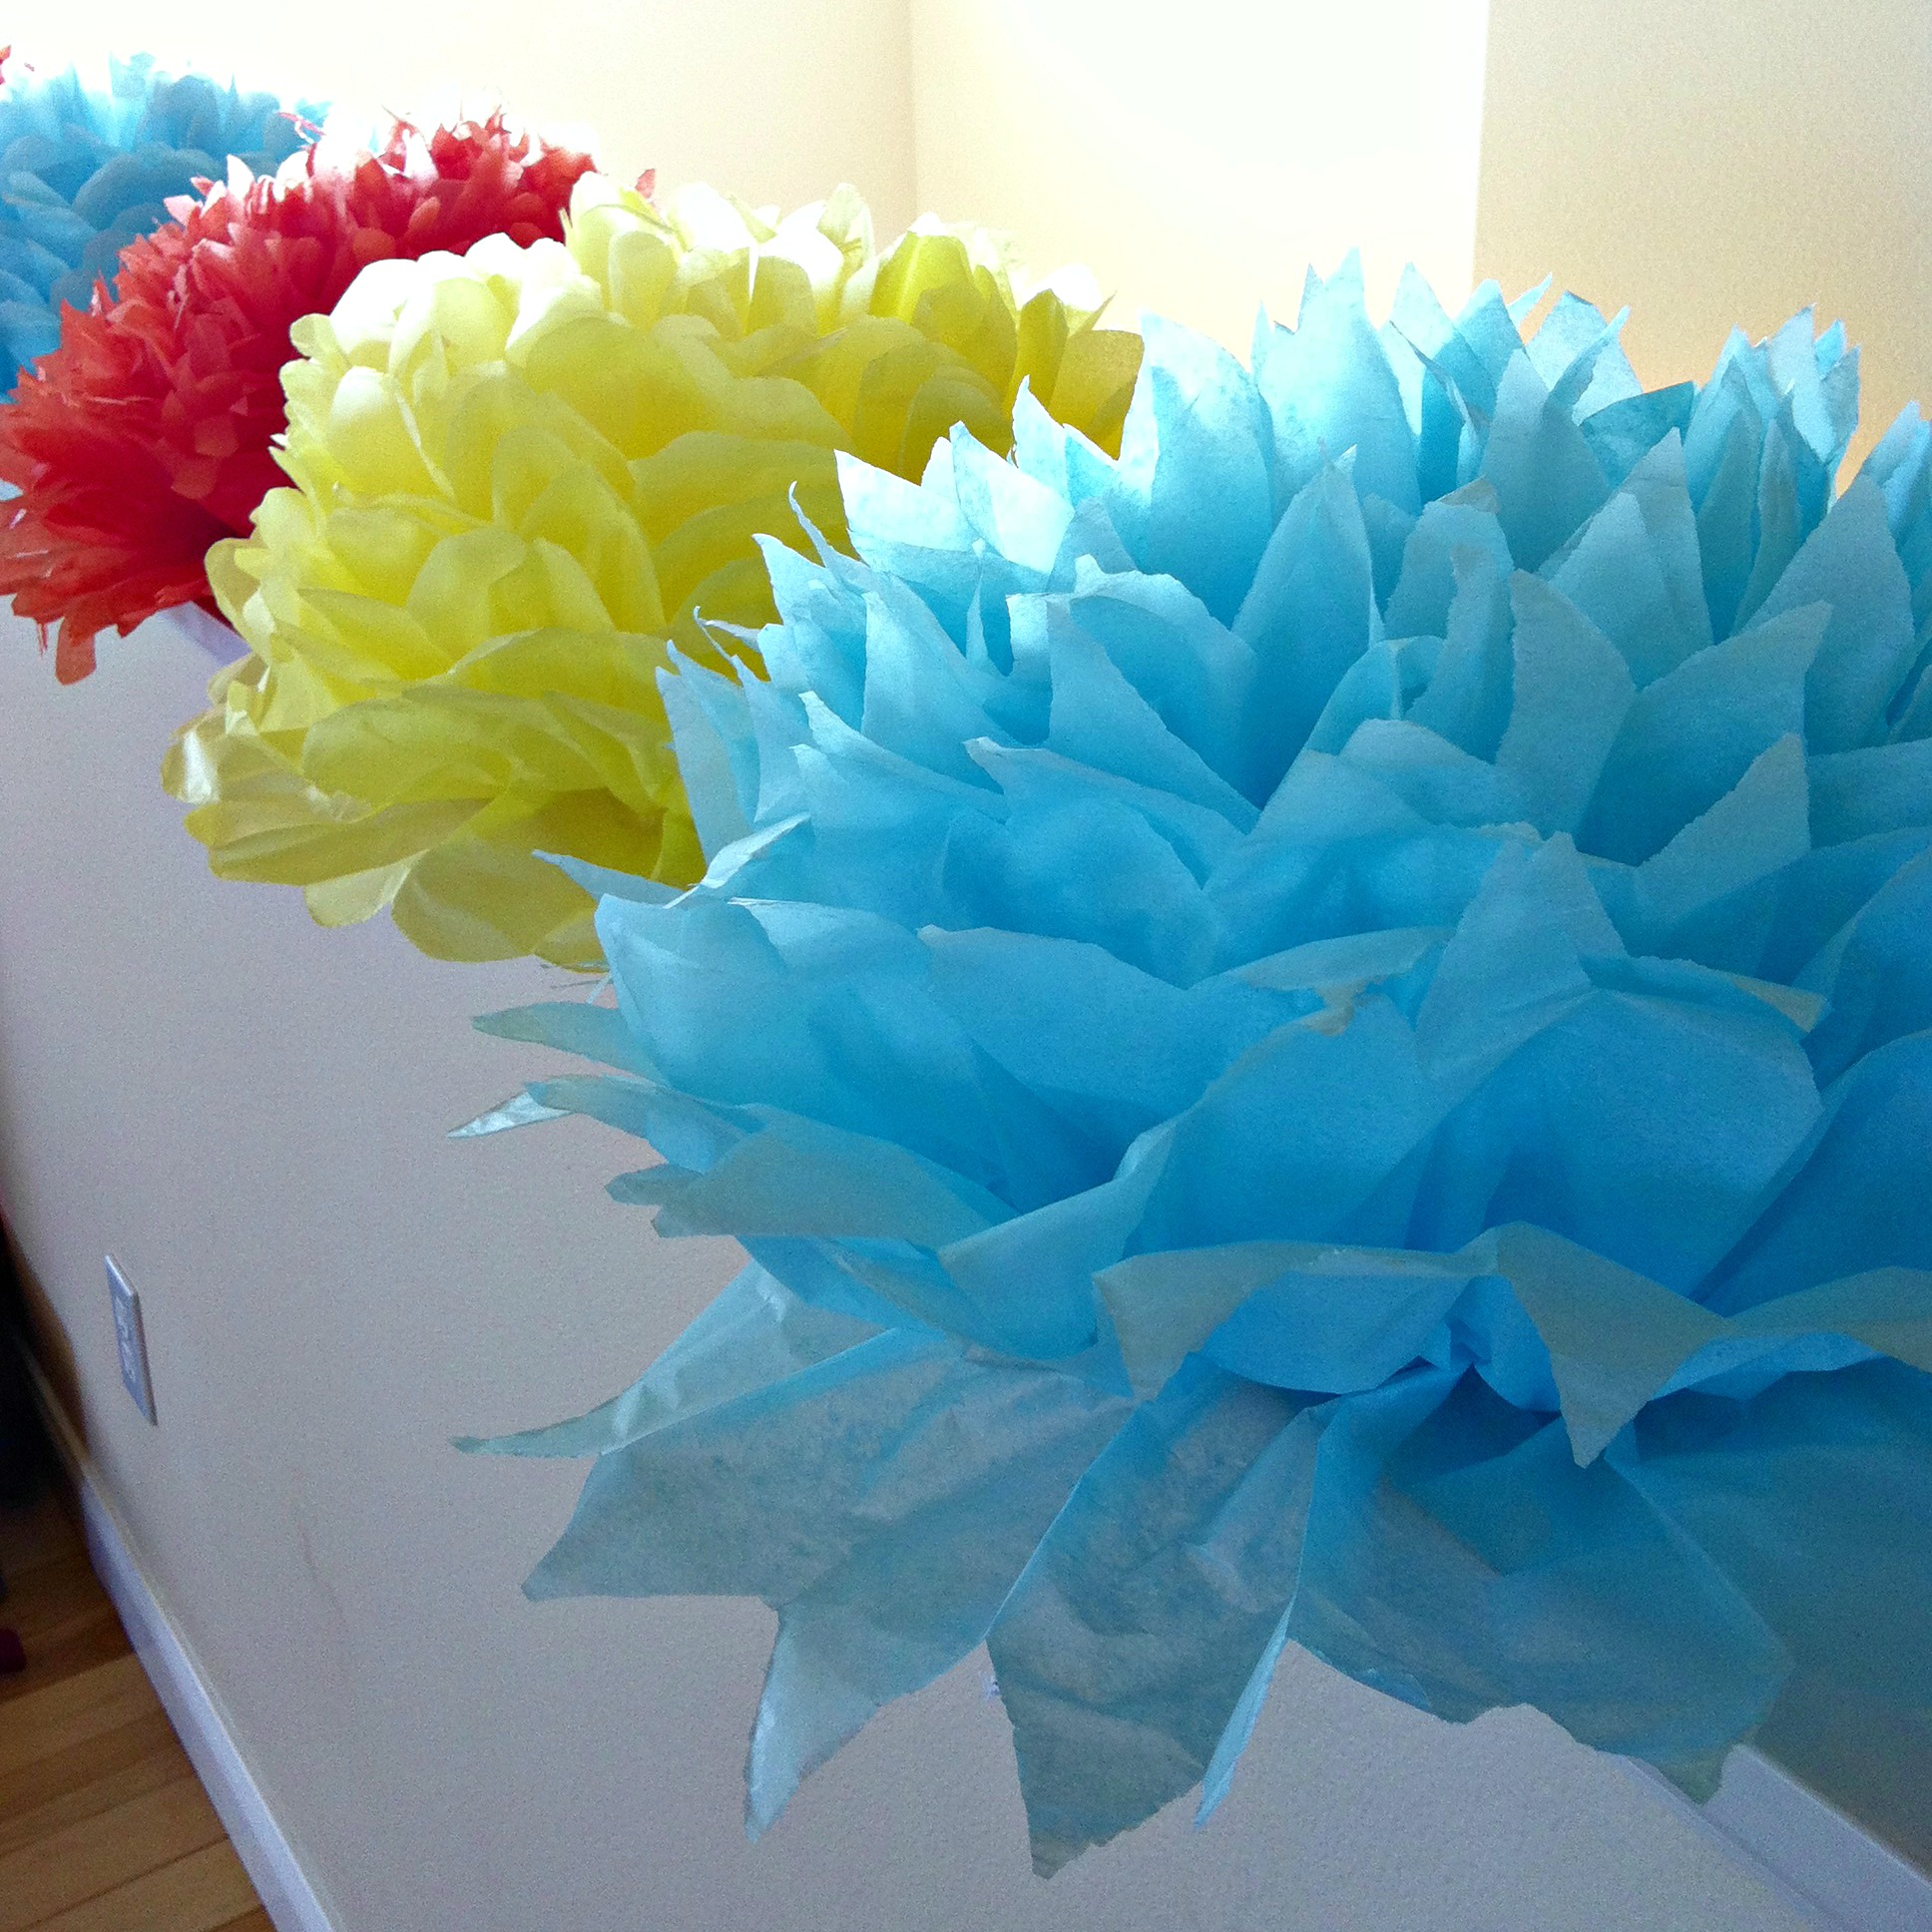 Tutorial How To Make Diy Giant Tissue Paper Flowers Hello Creative Family